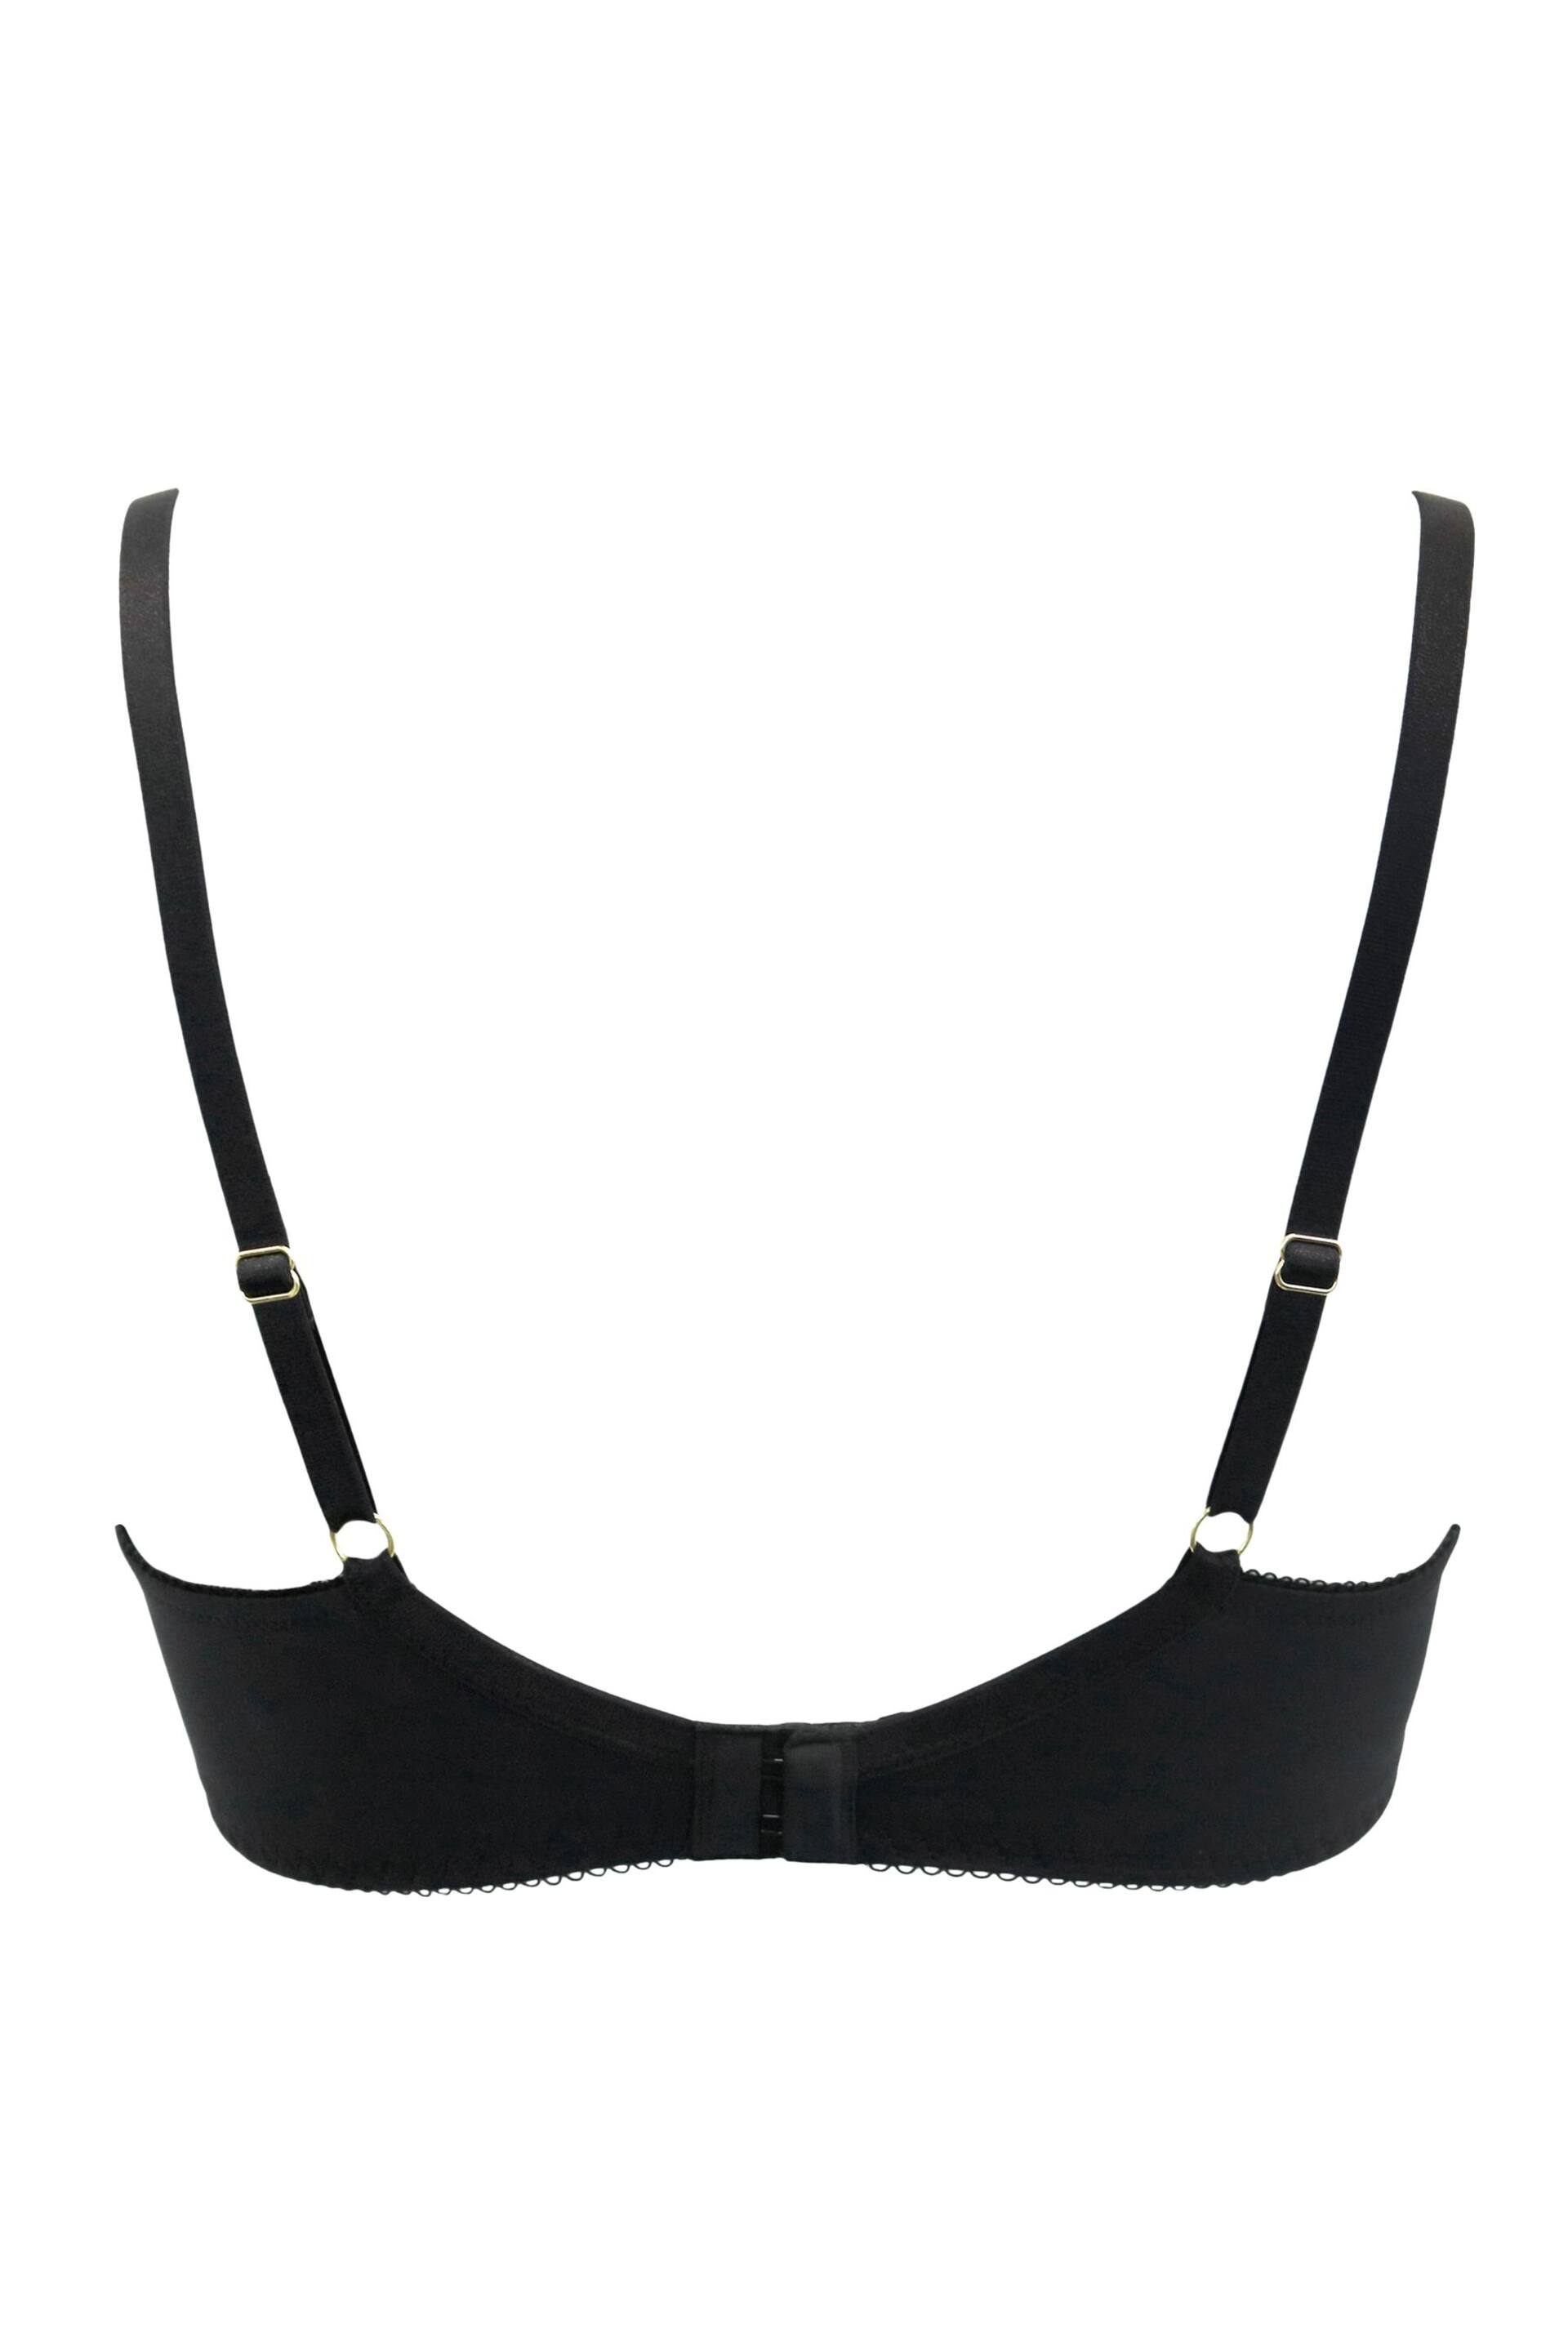 Pour Moi Black Padded J'Adore Bra - Image 5 of 5